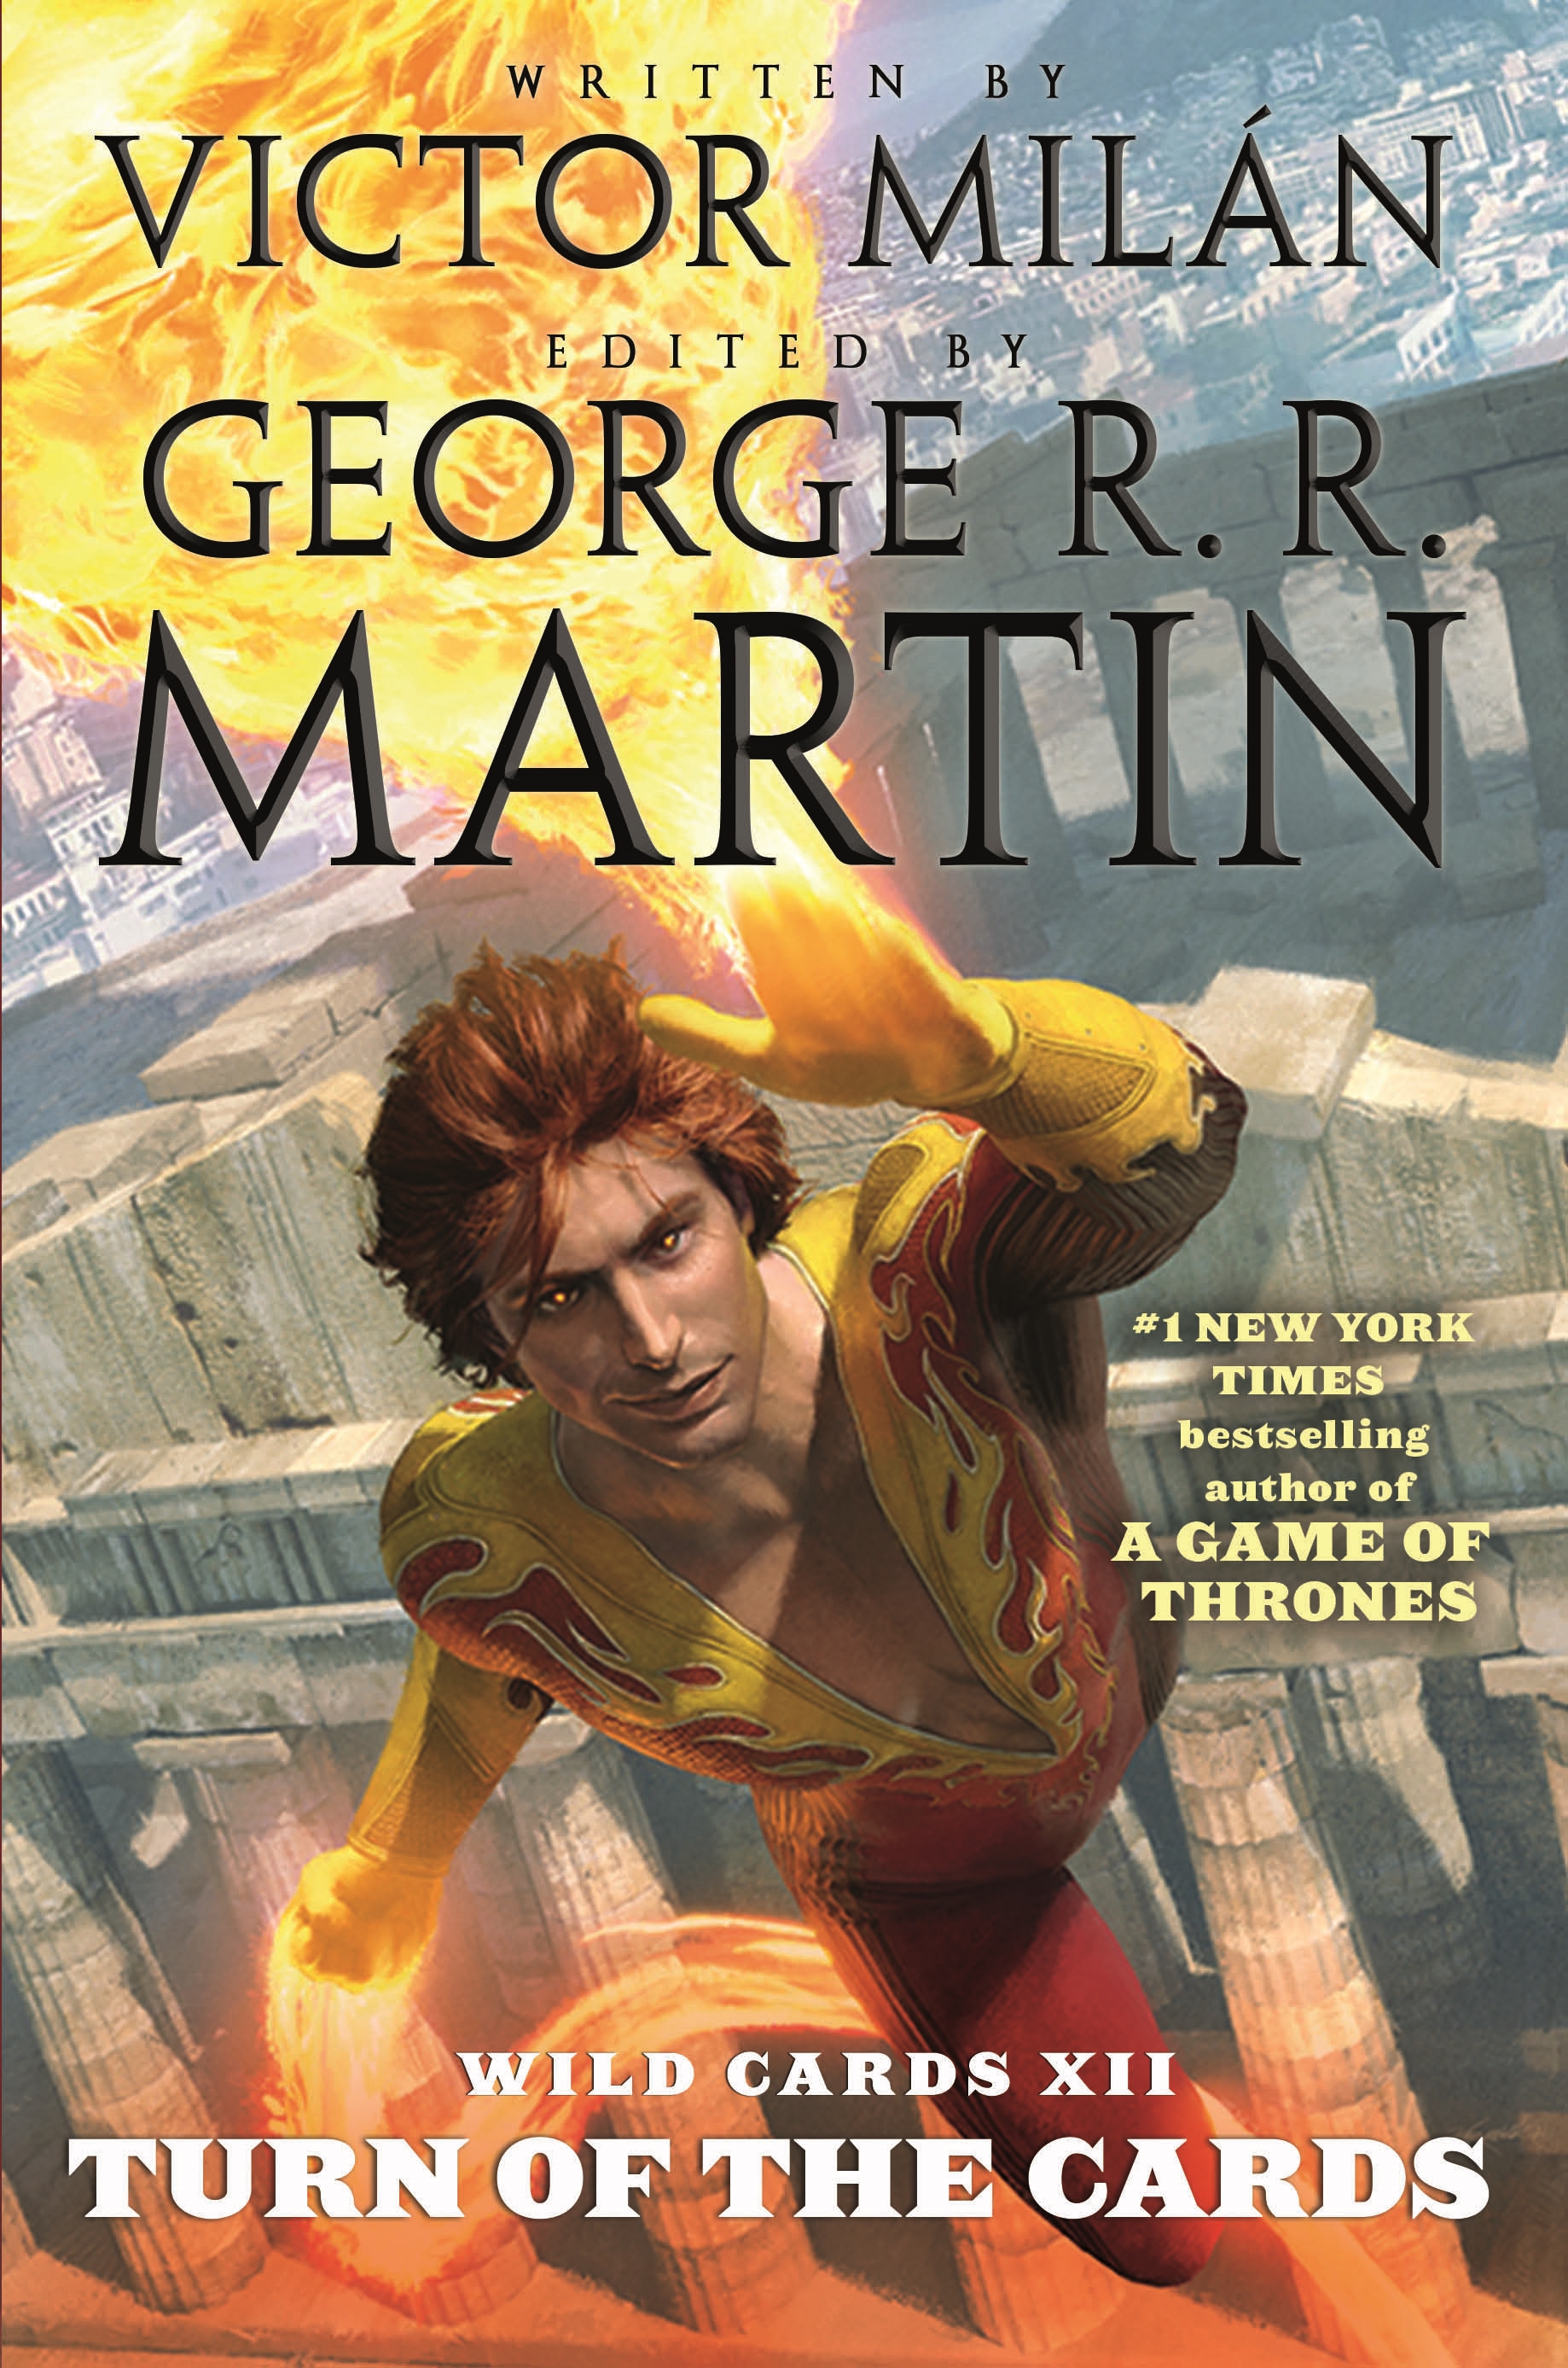 Wild Cards XII: Turn of the Cards by George R. R. Martin, Victor Milán